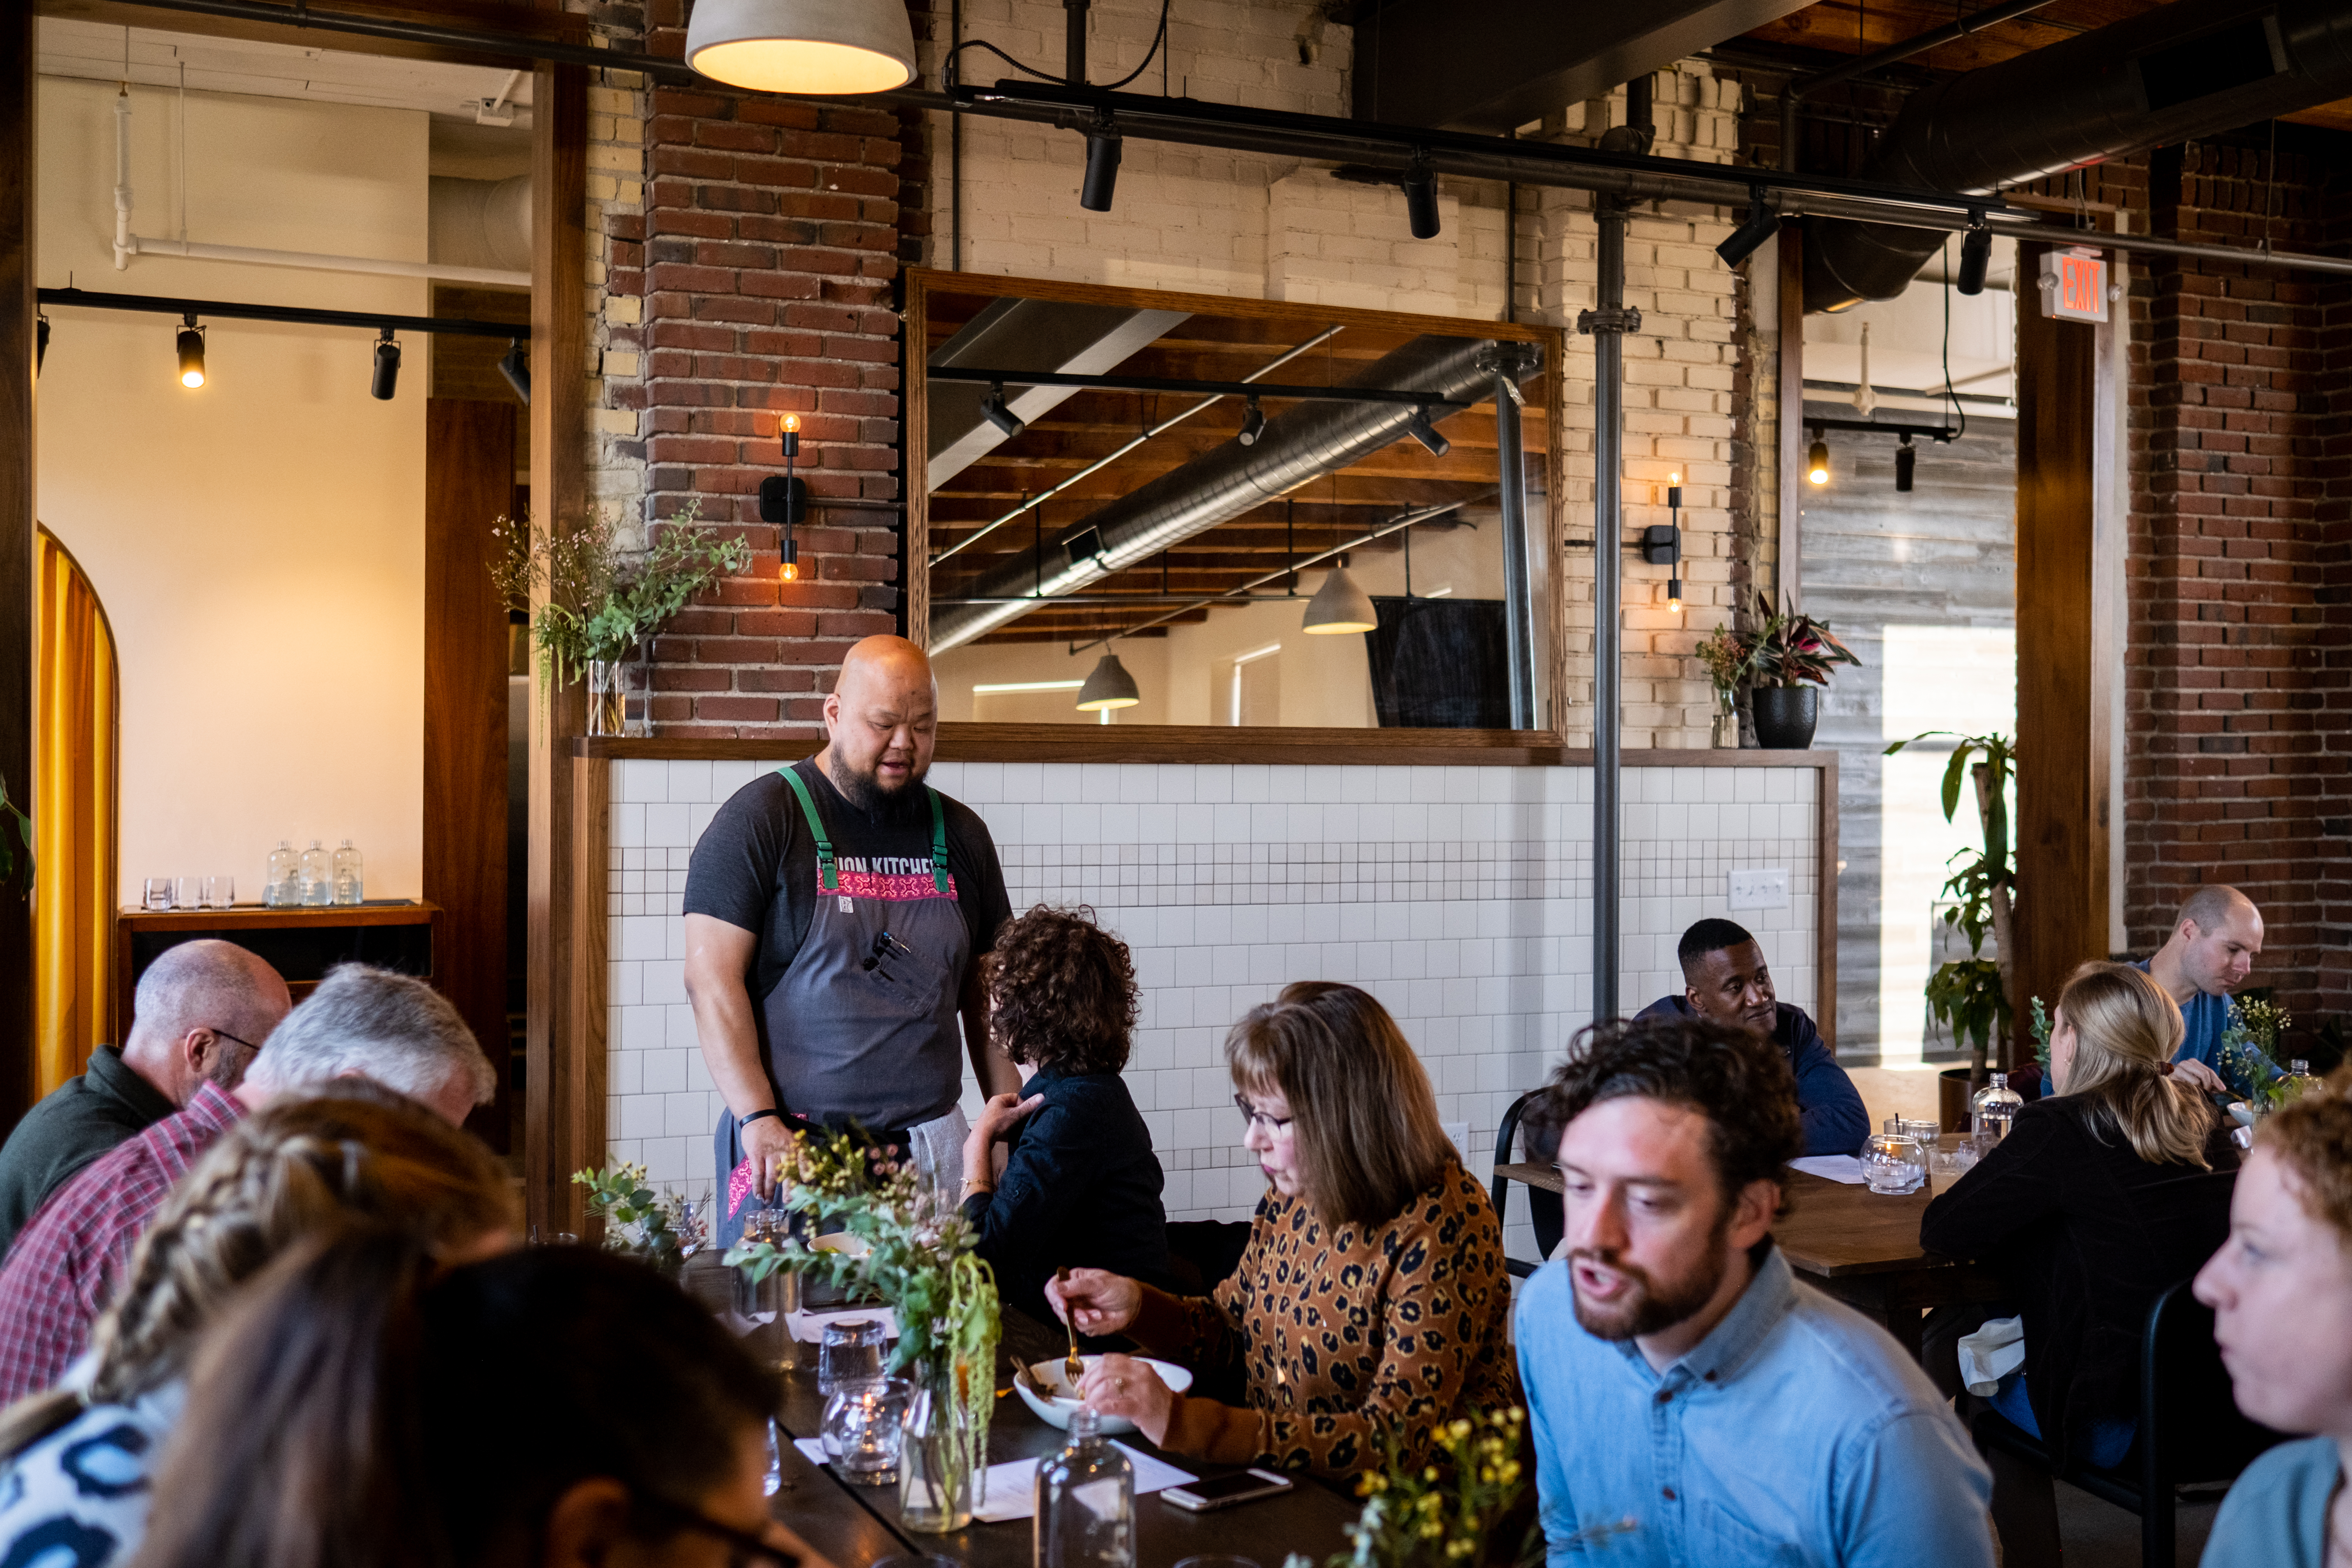 Chef Yia Vang stands at a table in the background wearing a black T-Shirt and grey apron. Diners are seated and dining in the foreground; behind Vang is a brick wall with large windows and track lighting. 